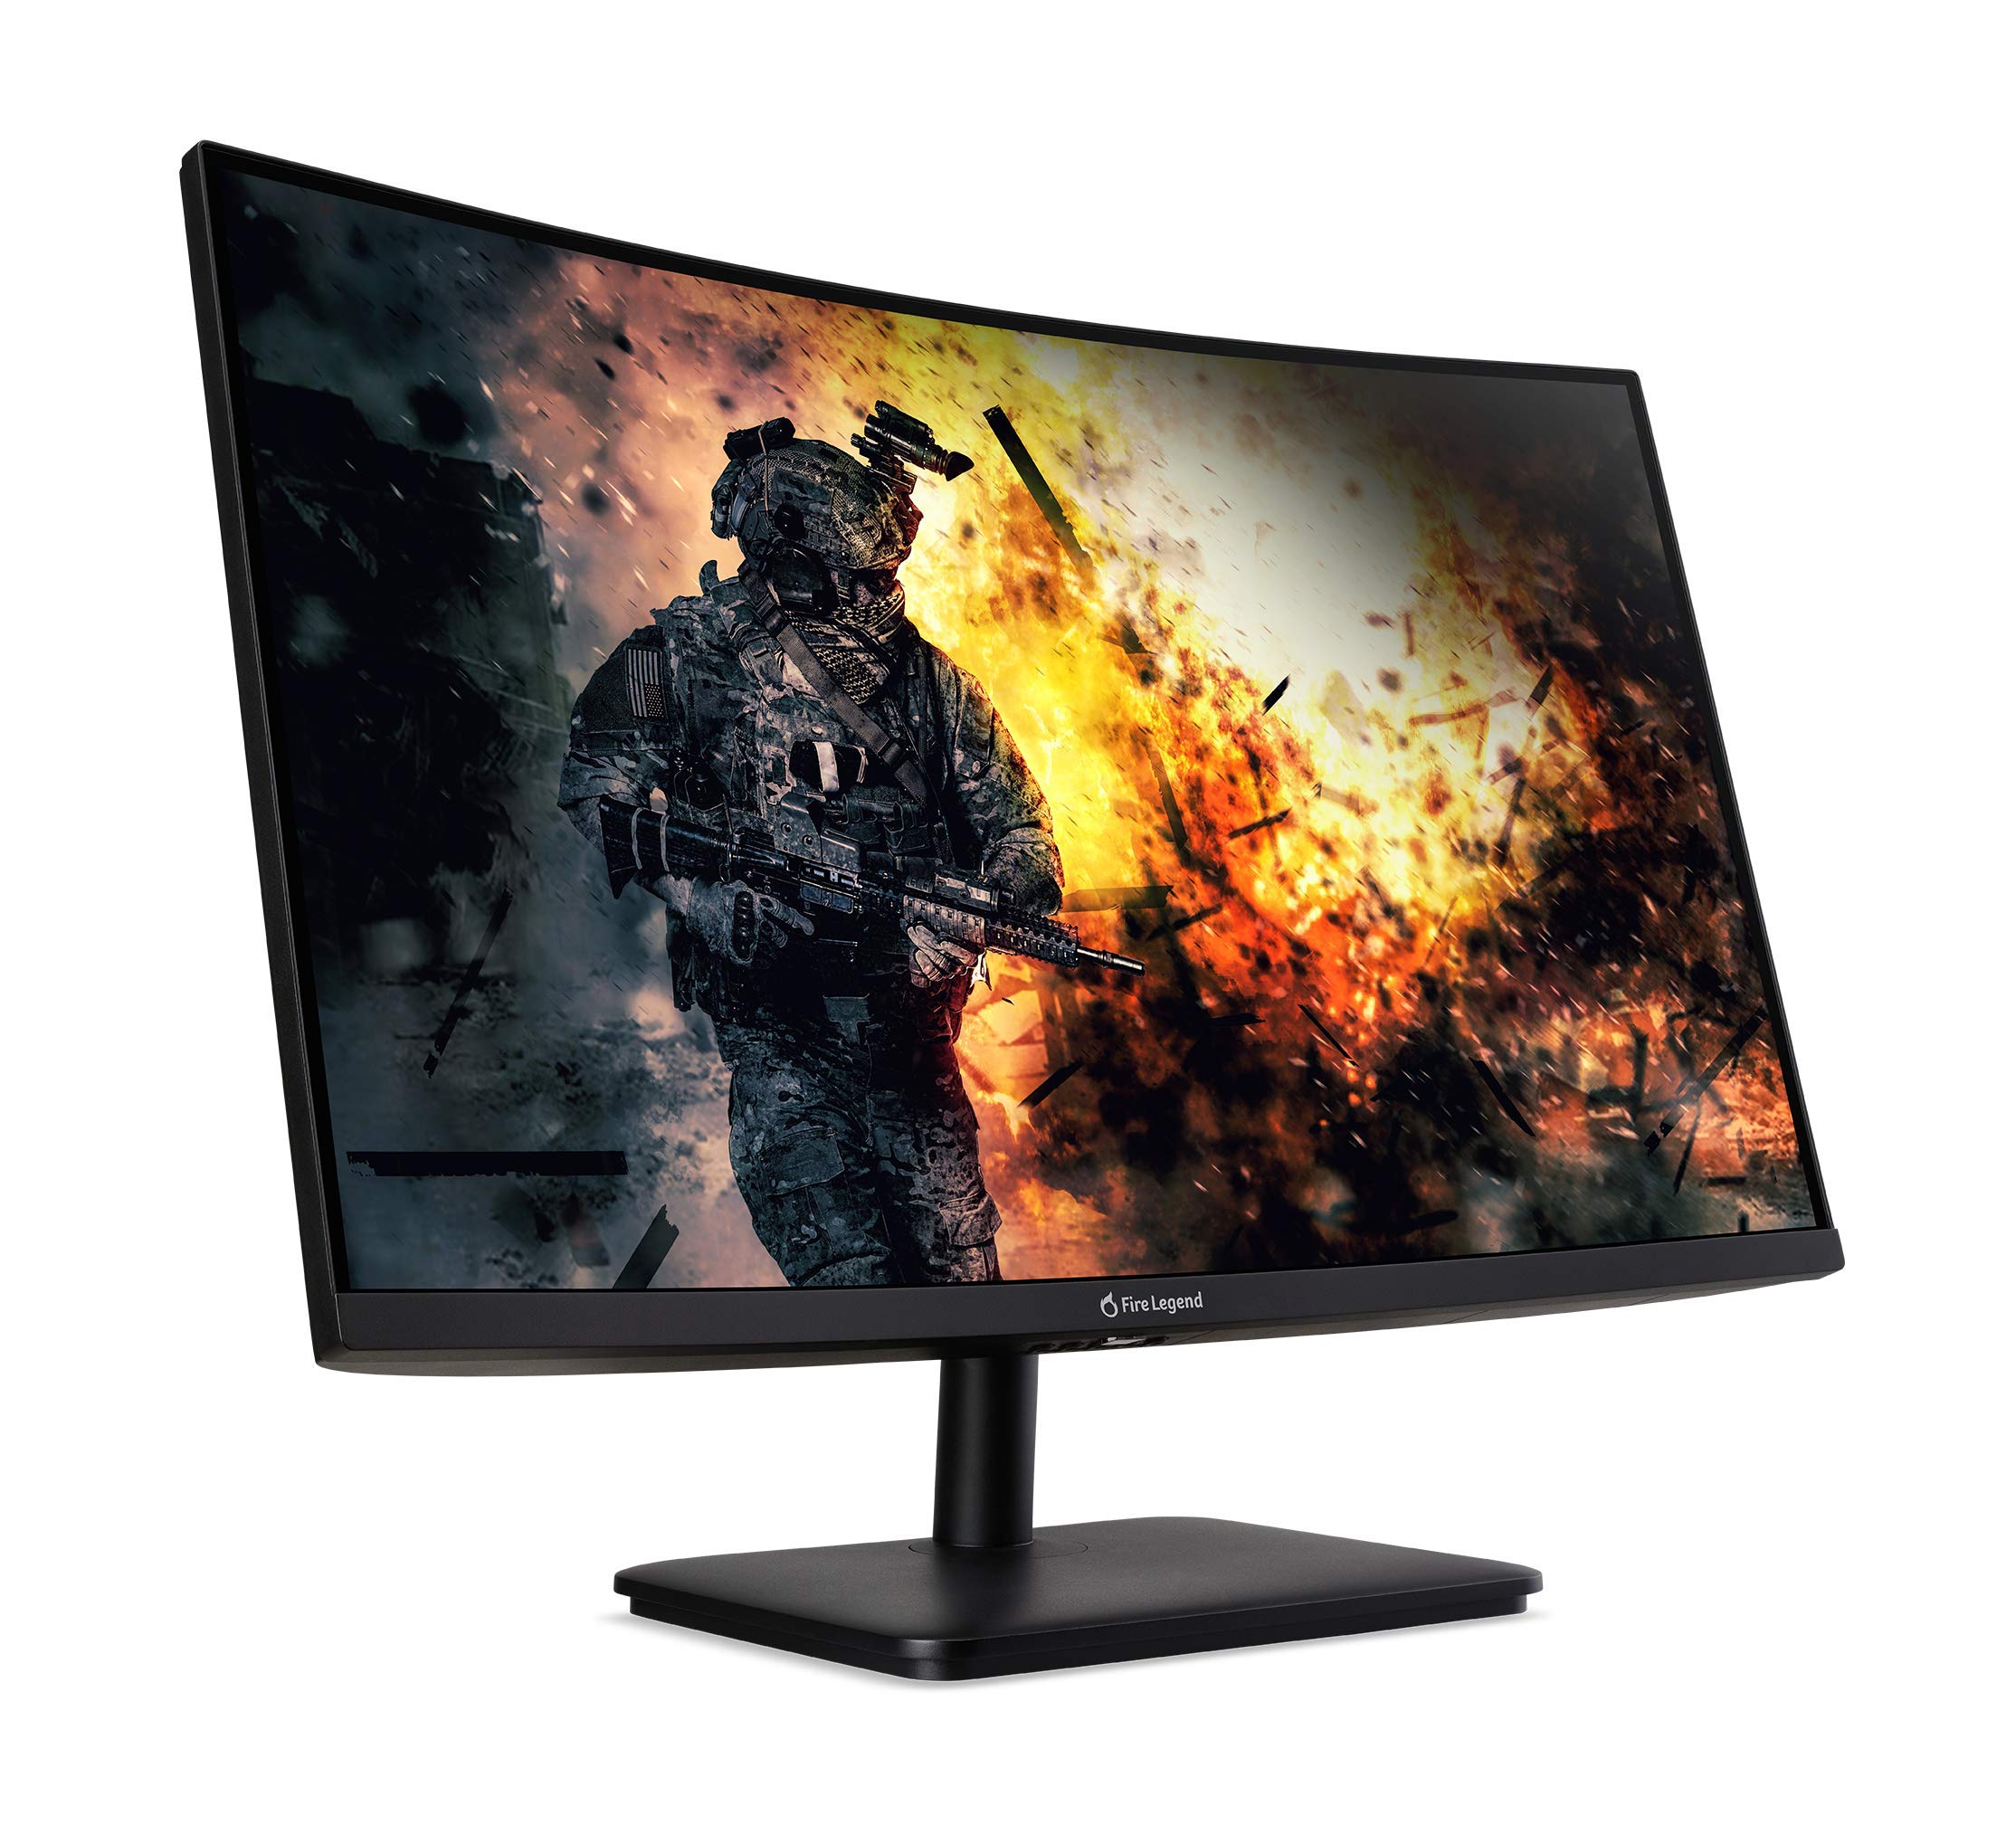 AOPEN 27HC5R Vbiipx 27" Full HD (1920 x 1080) VA 1500R Curved Gaming-Monitor | AMD FreeSync Premium | 165Hz Refresh Rate | 1ms-TVR | HDR 10 Support | Ports: 1 x Display Port 1.4 & 2 x HDMI 2.0, Black